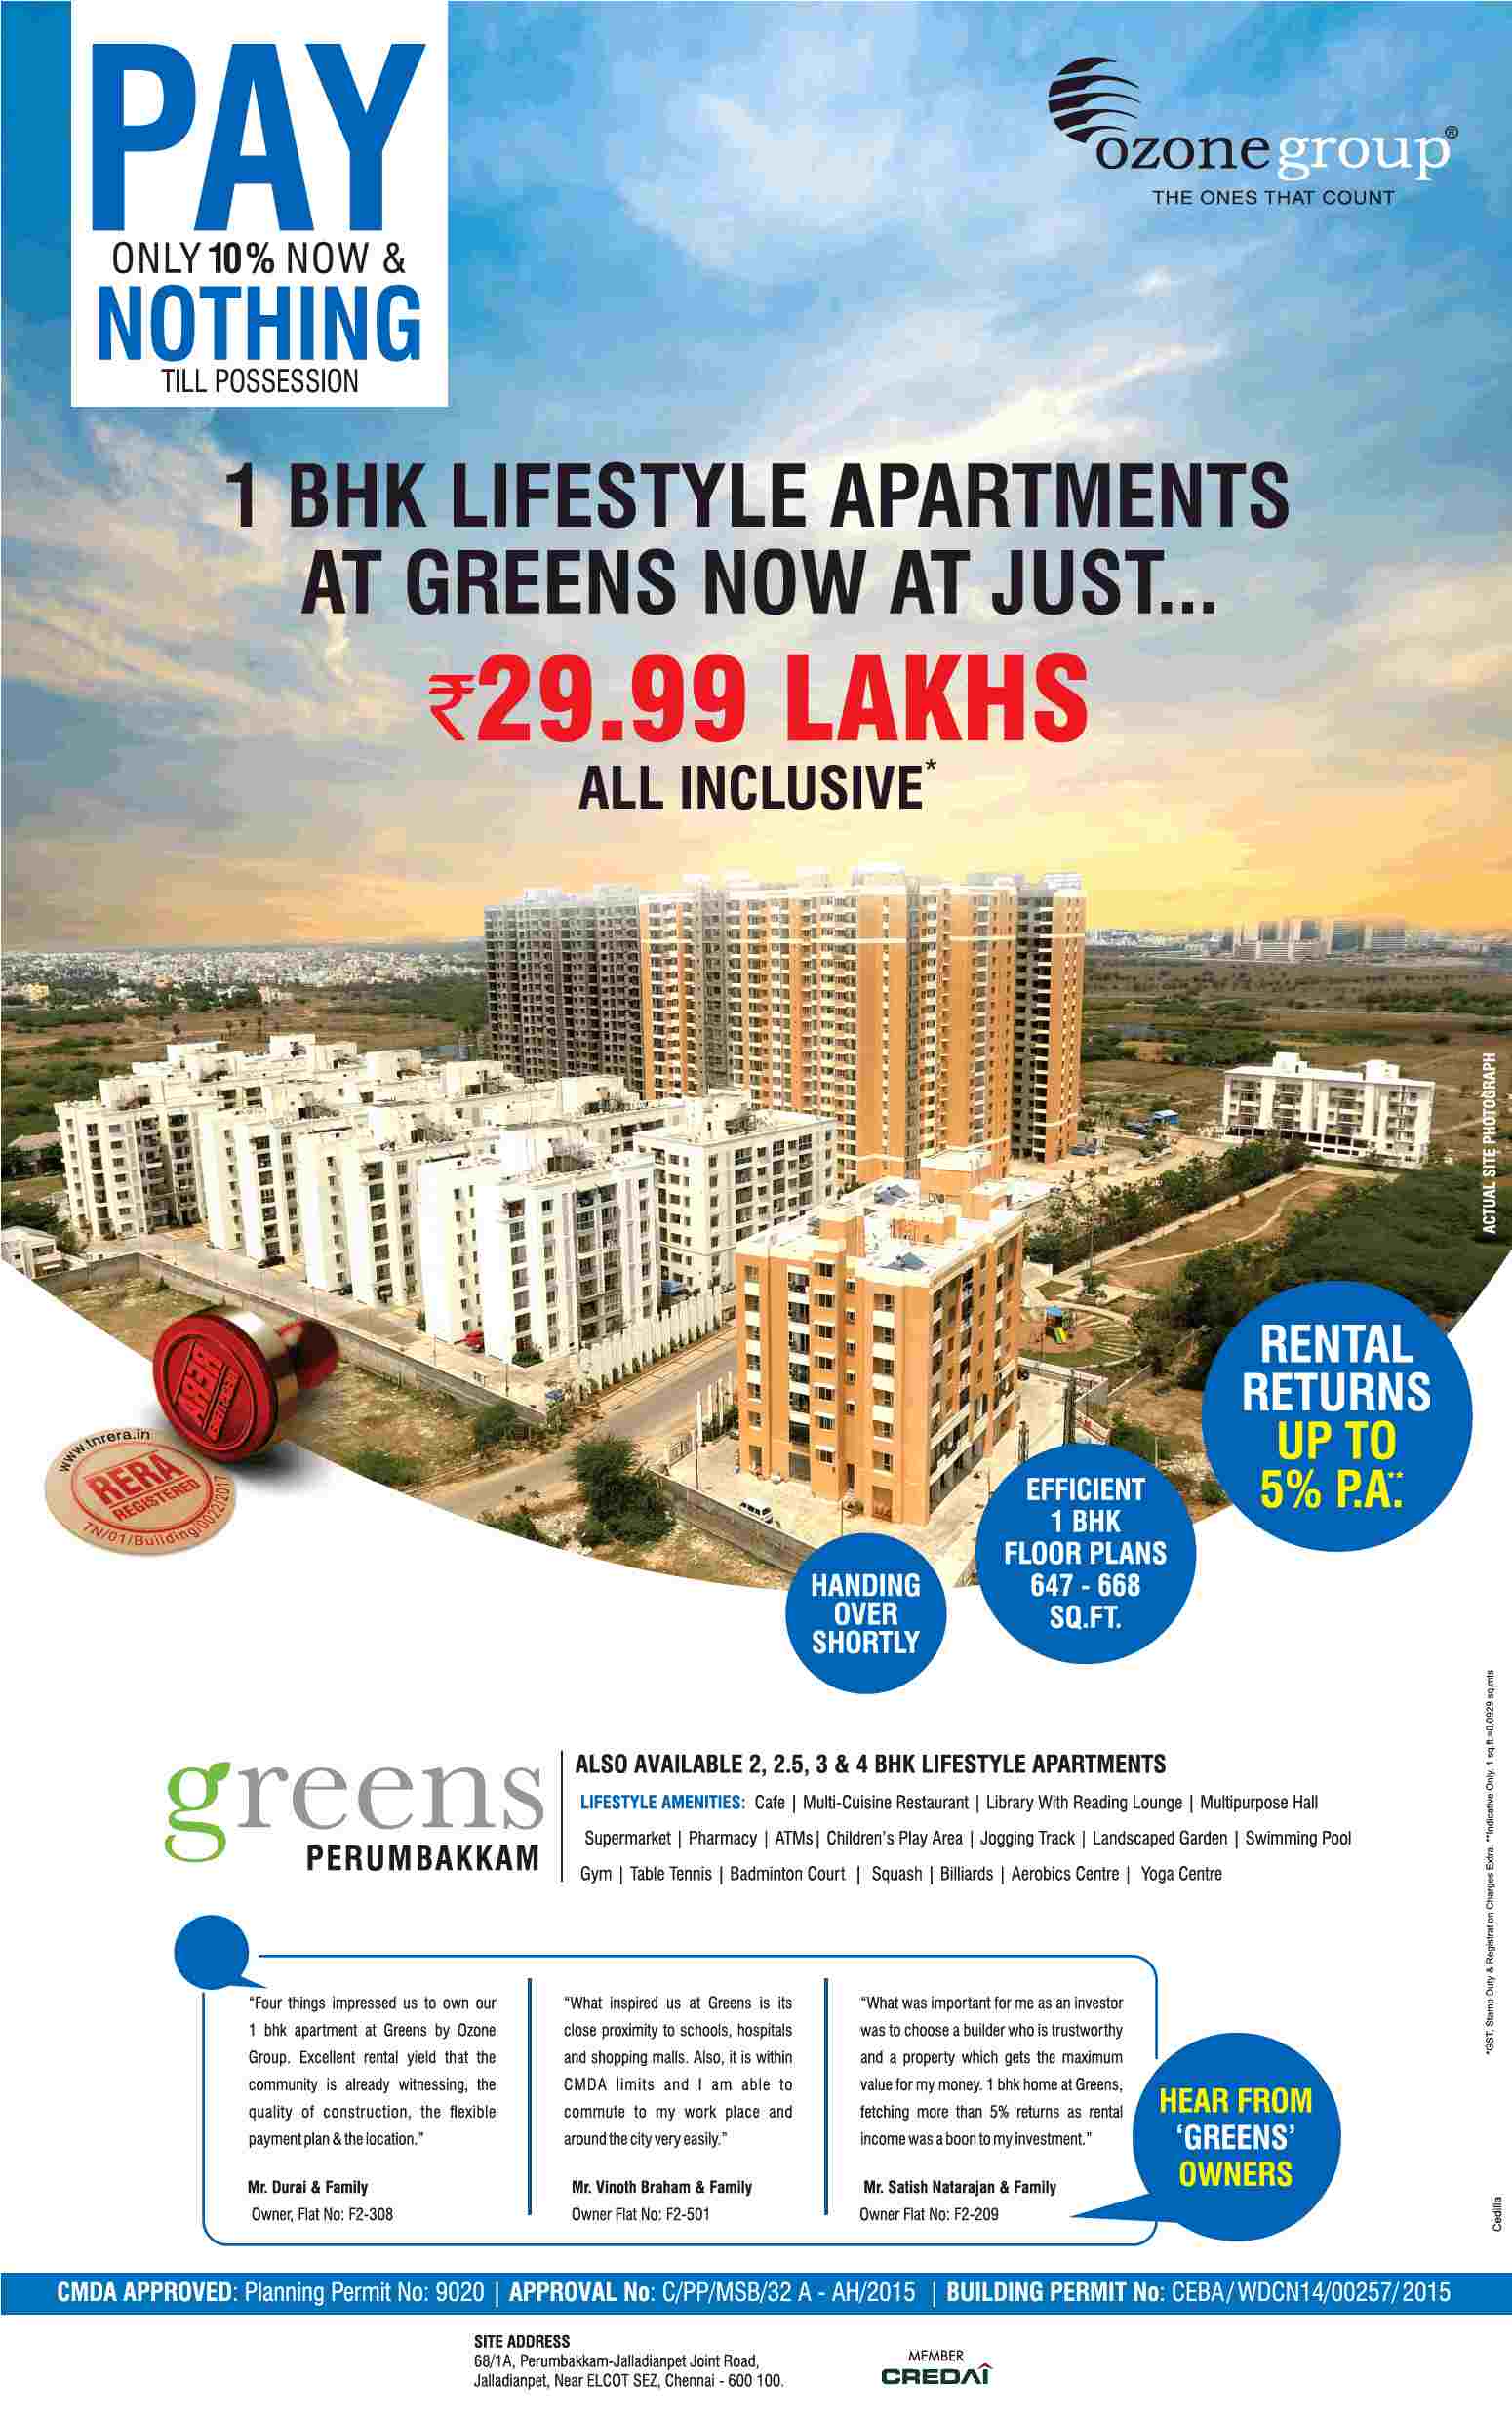 Earn rental returns up to 5% per annum at Ozone Greens in Chennai Update